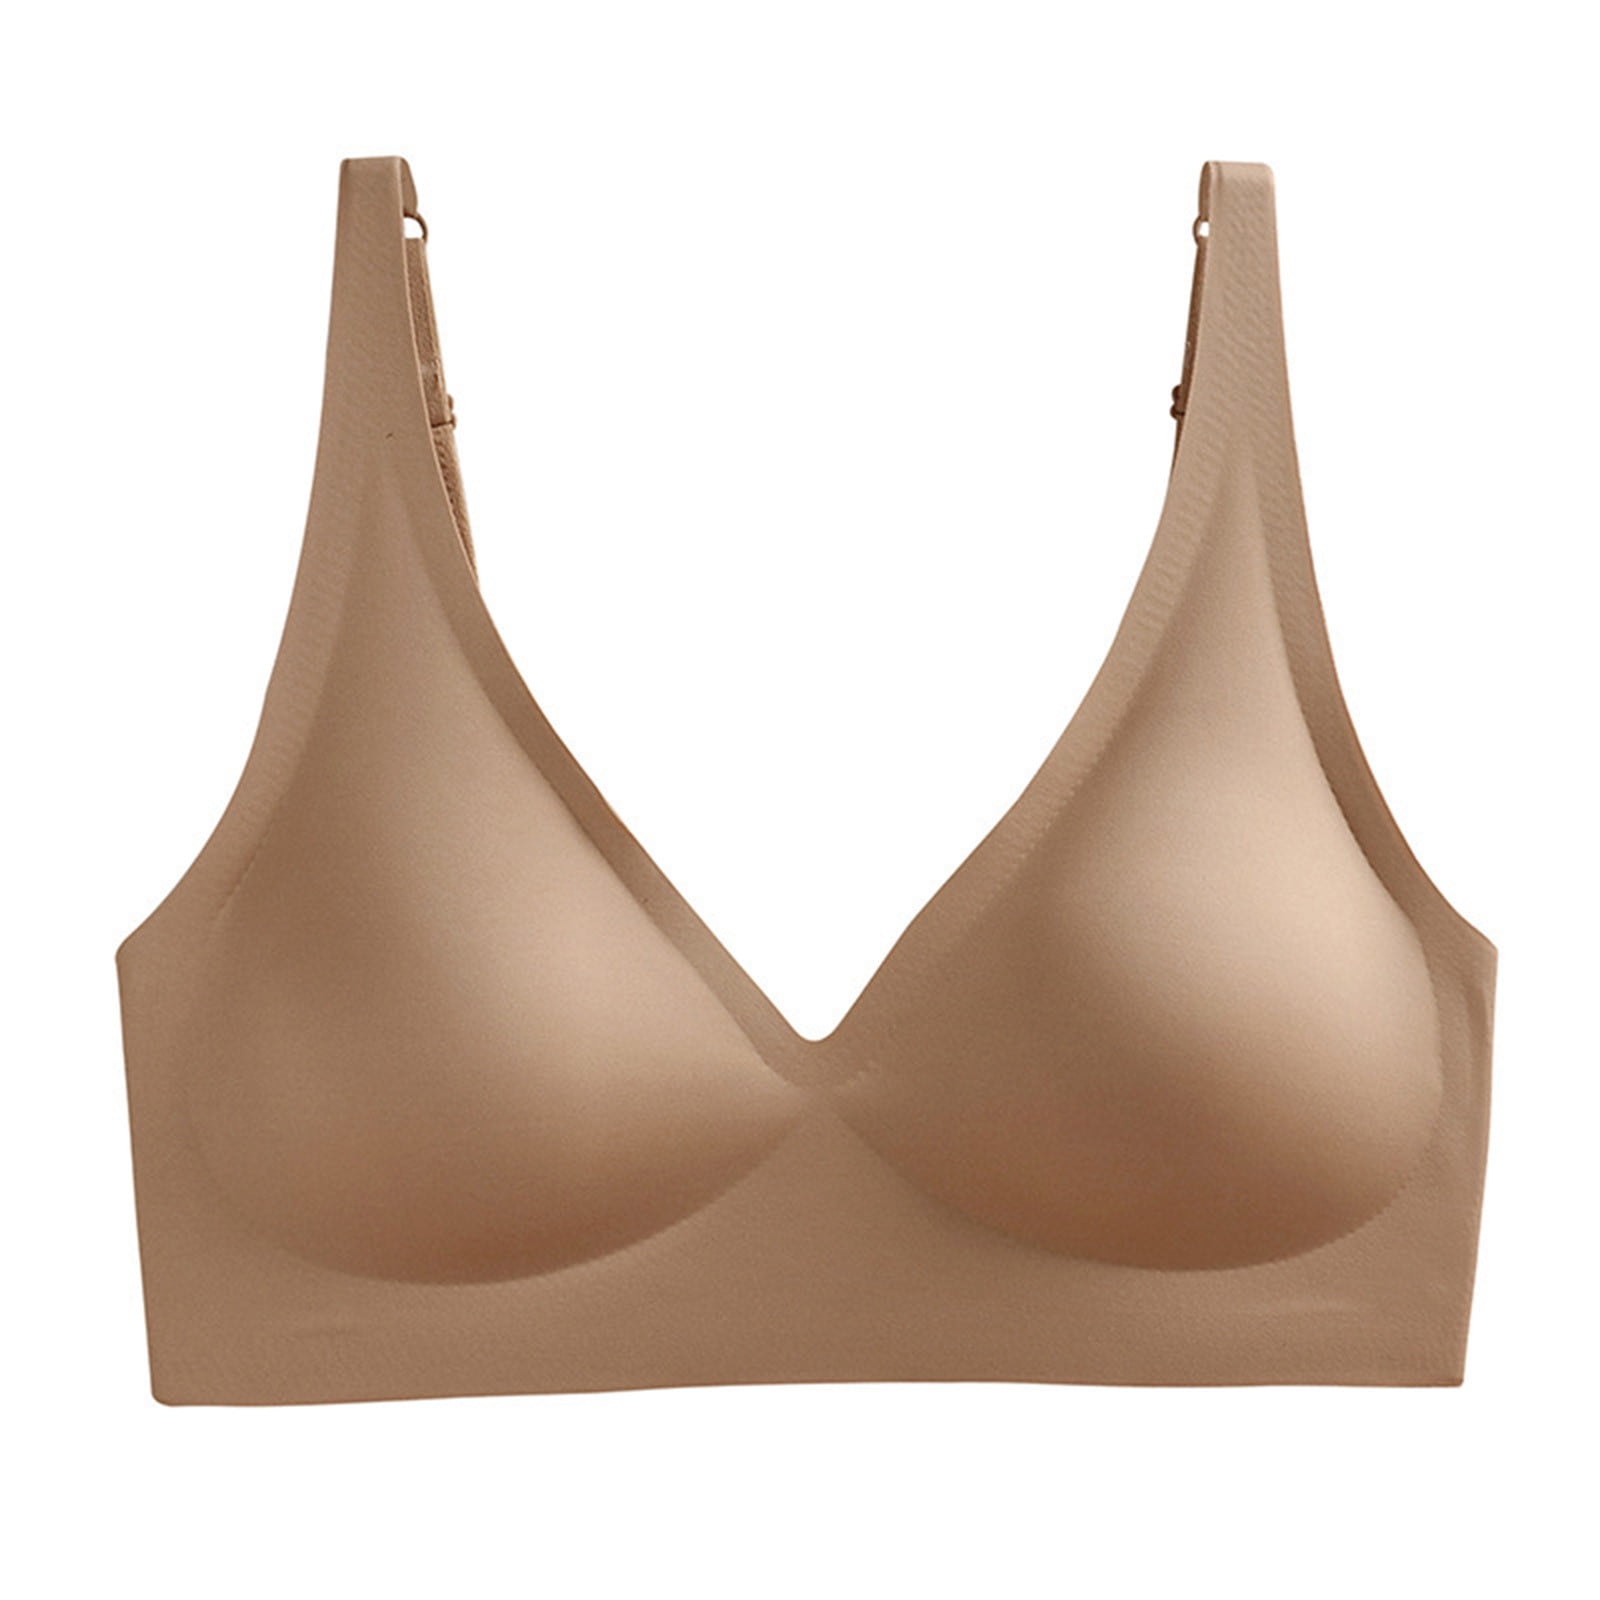 Bras For Women,Lace Minimizer Bras For Women Full Coverage Unlined